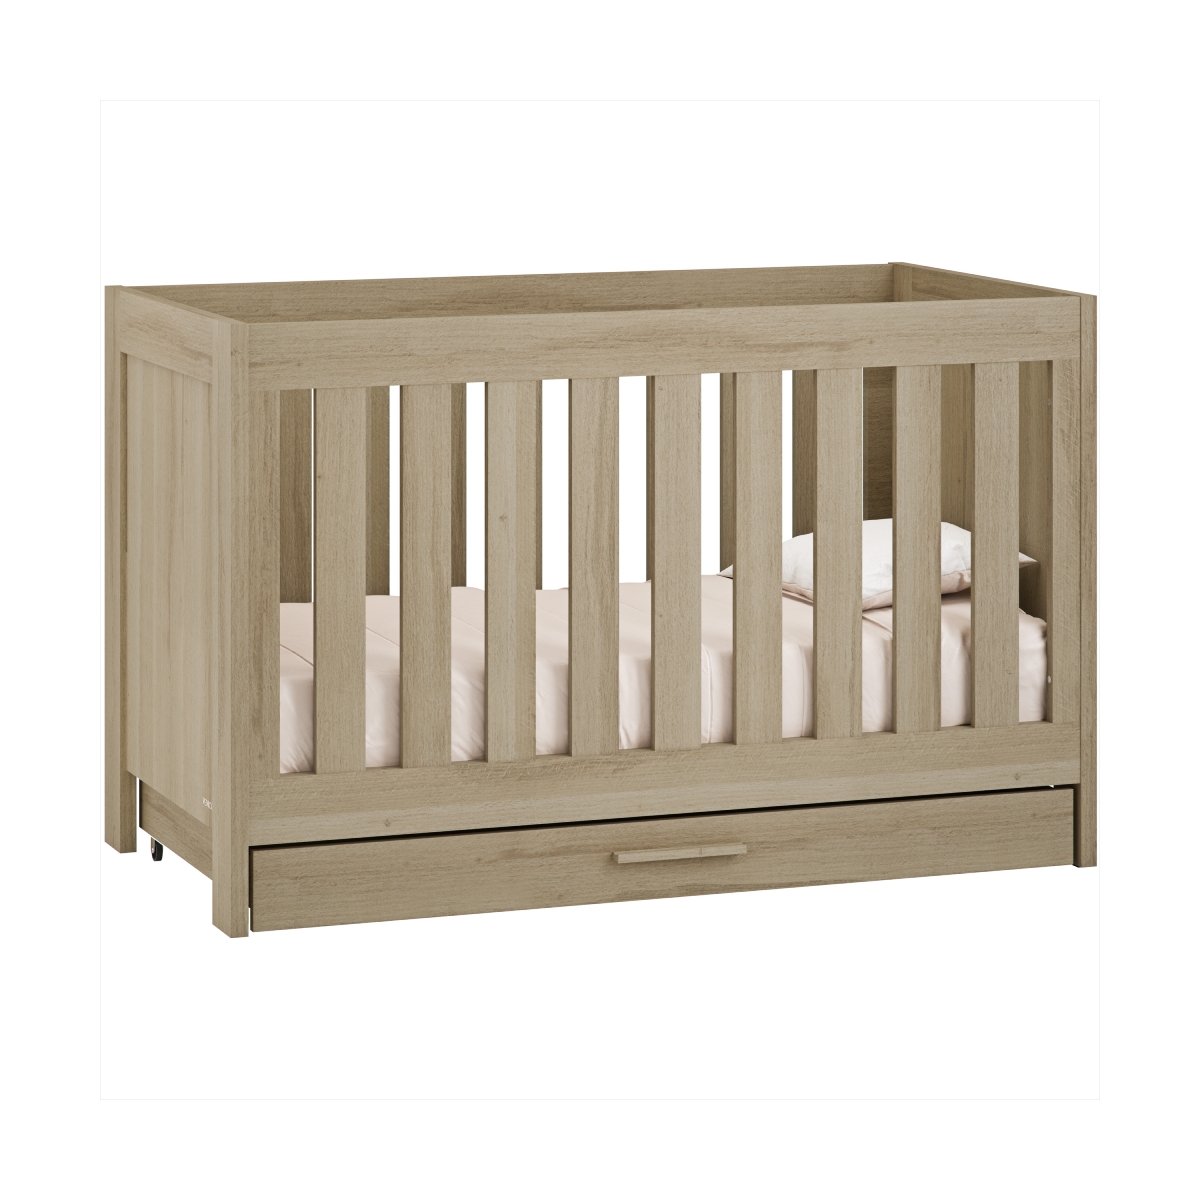 Venicci Forenzo Cot Bed with Undrawer